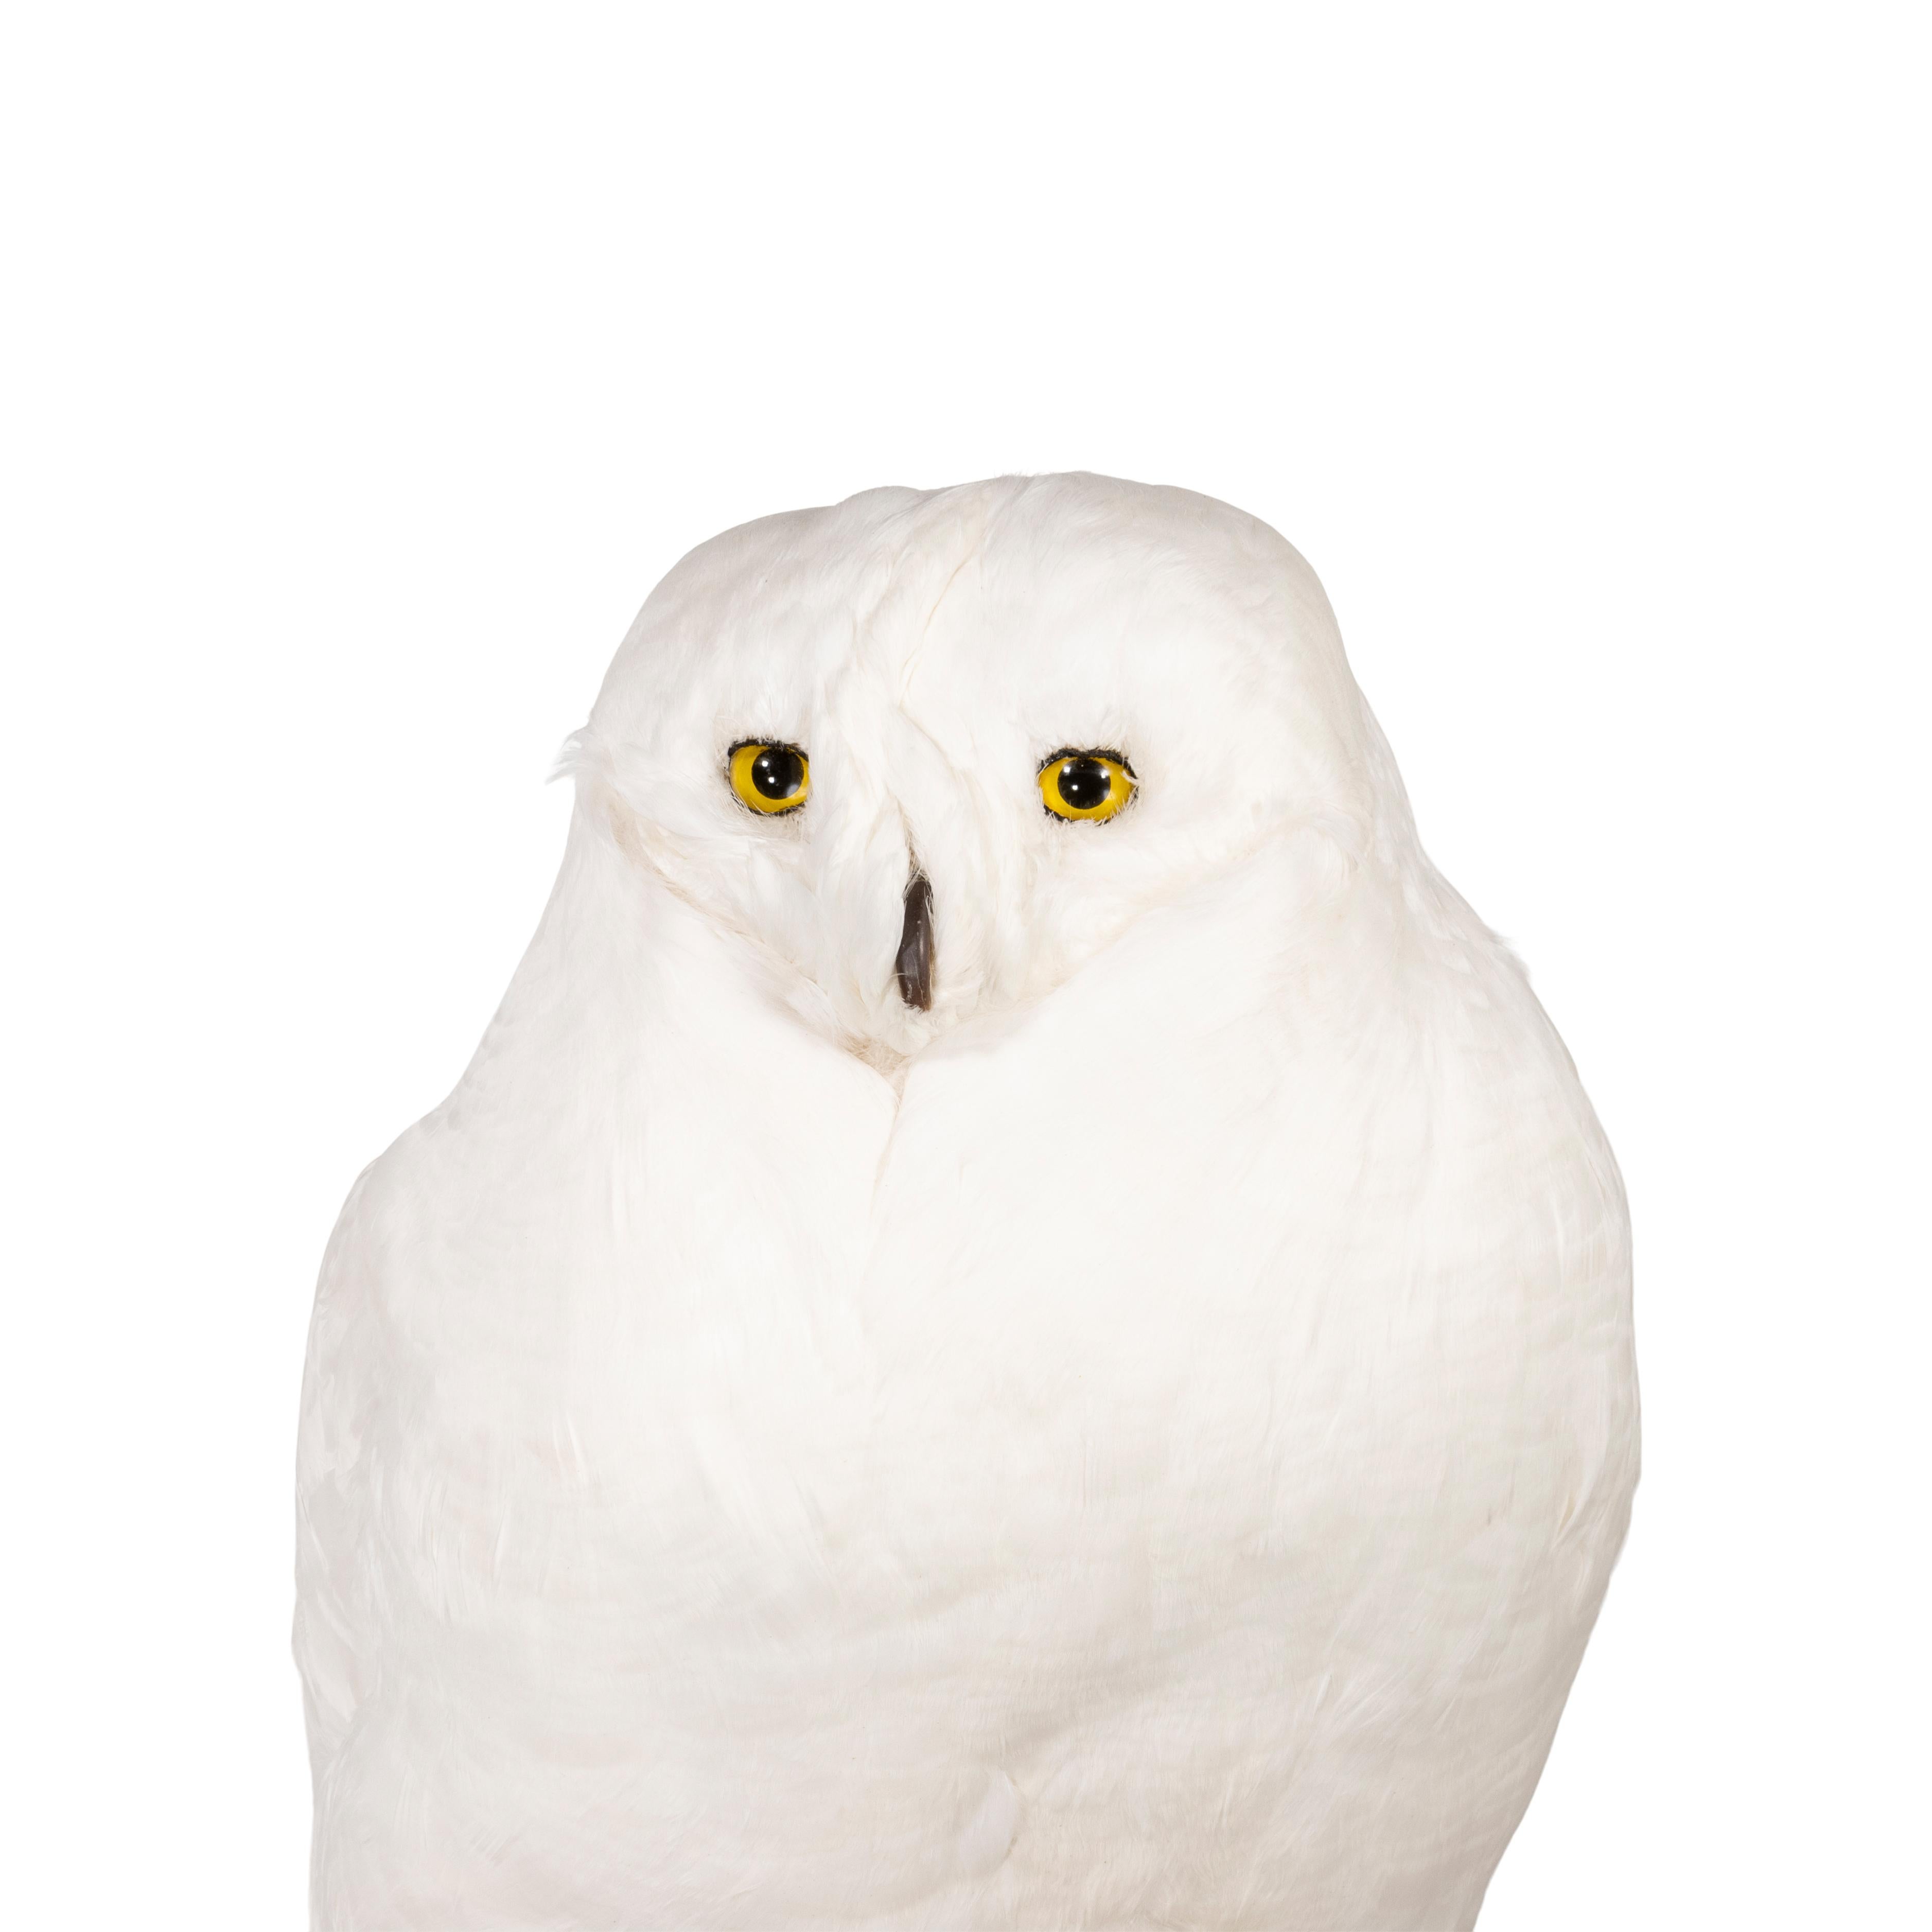 Snowy owl on driftwood mount. Life-size and realistic however made of white Imden farm goose feathers as a recreation. The beak and claws are sculpted from a resin material. 28